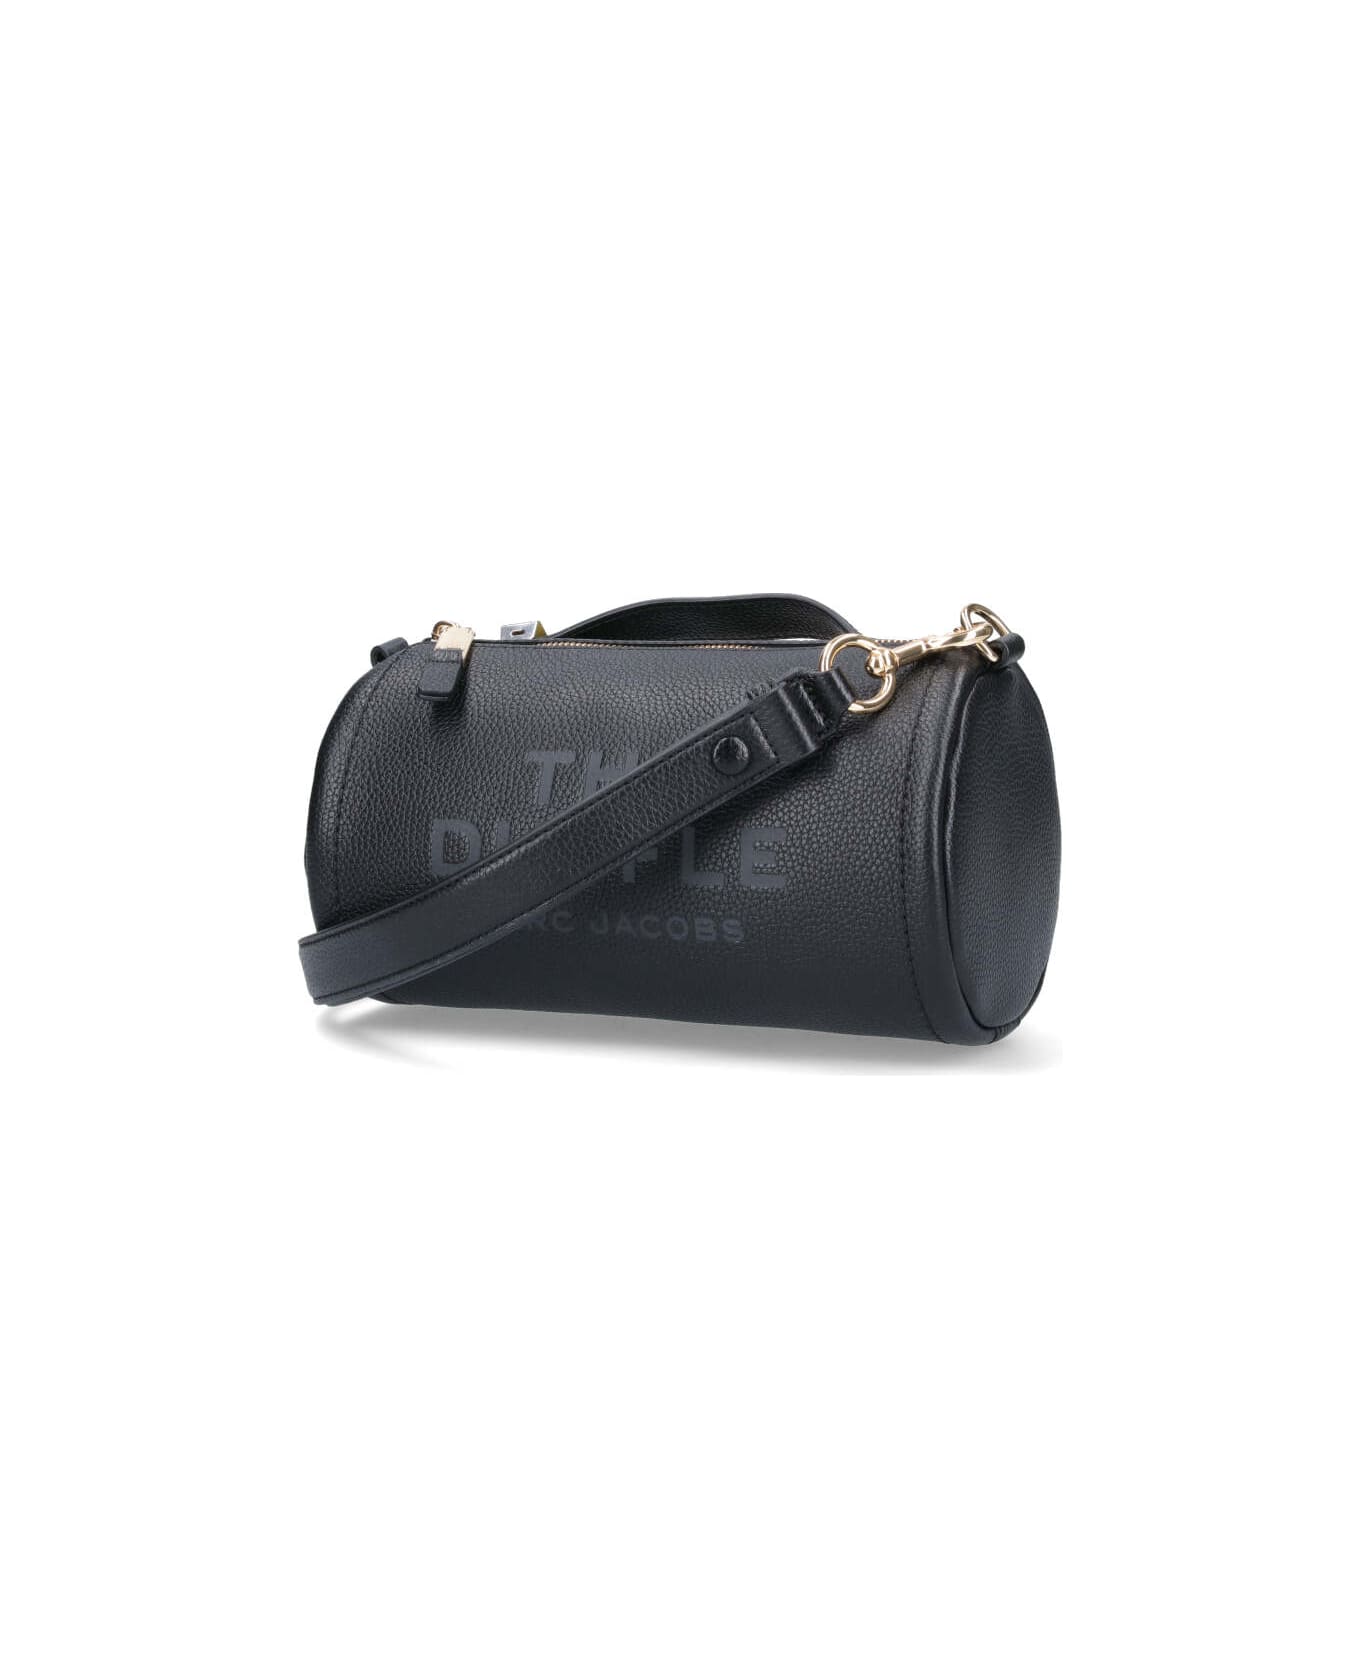 Marc Jacobs Black Leather Duffle Bag - Black クラッチバッグ